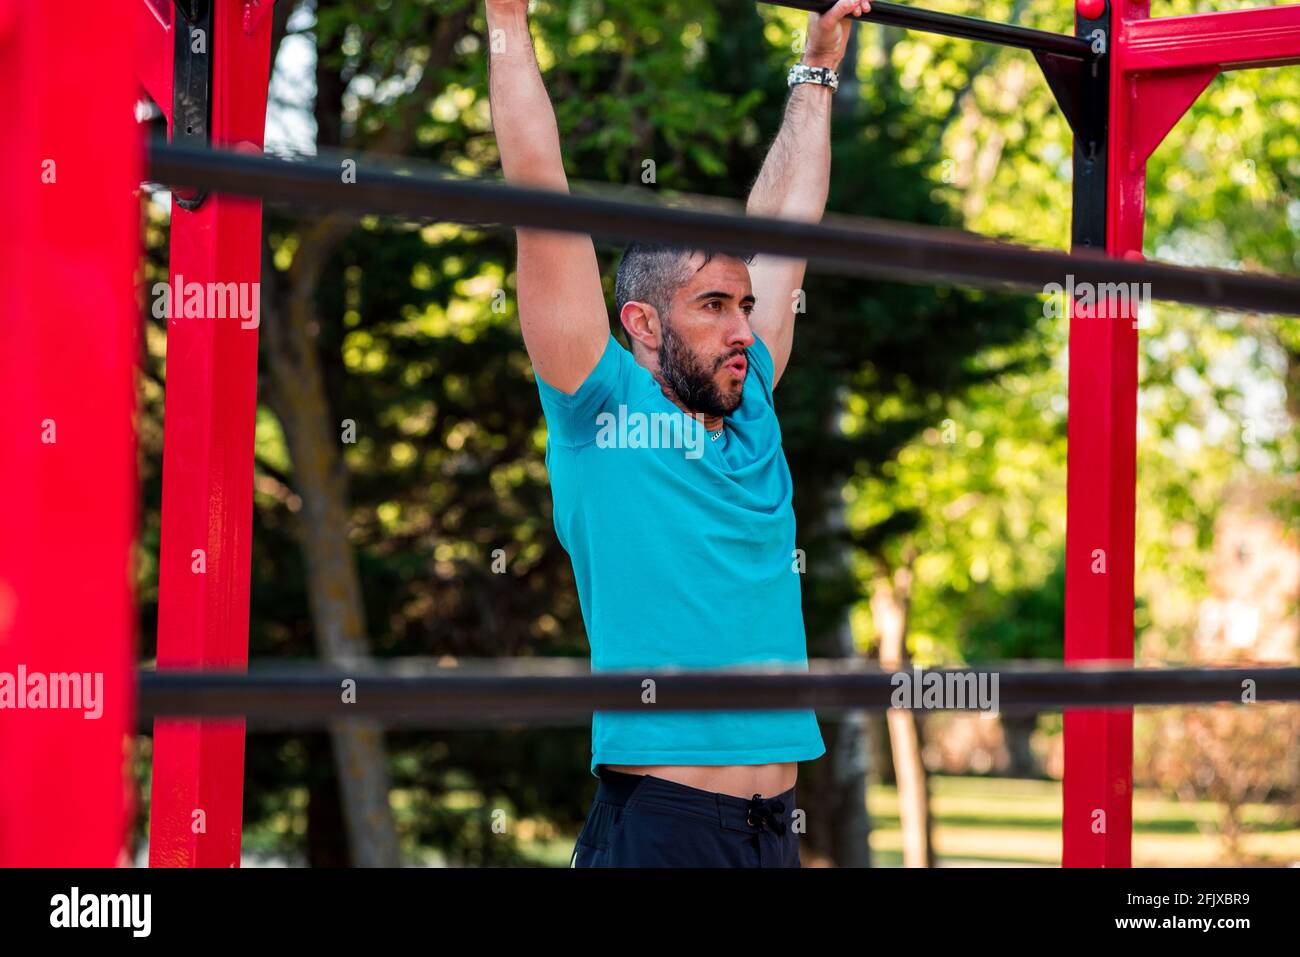 Dark-haired athlete with beard hanging from a calisthenics bar. View between bars. Outdoor crossfit concept. Stock Photo